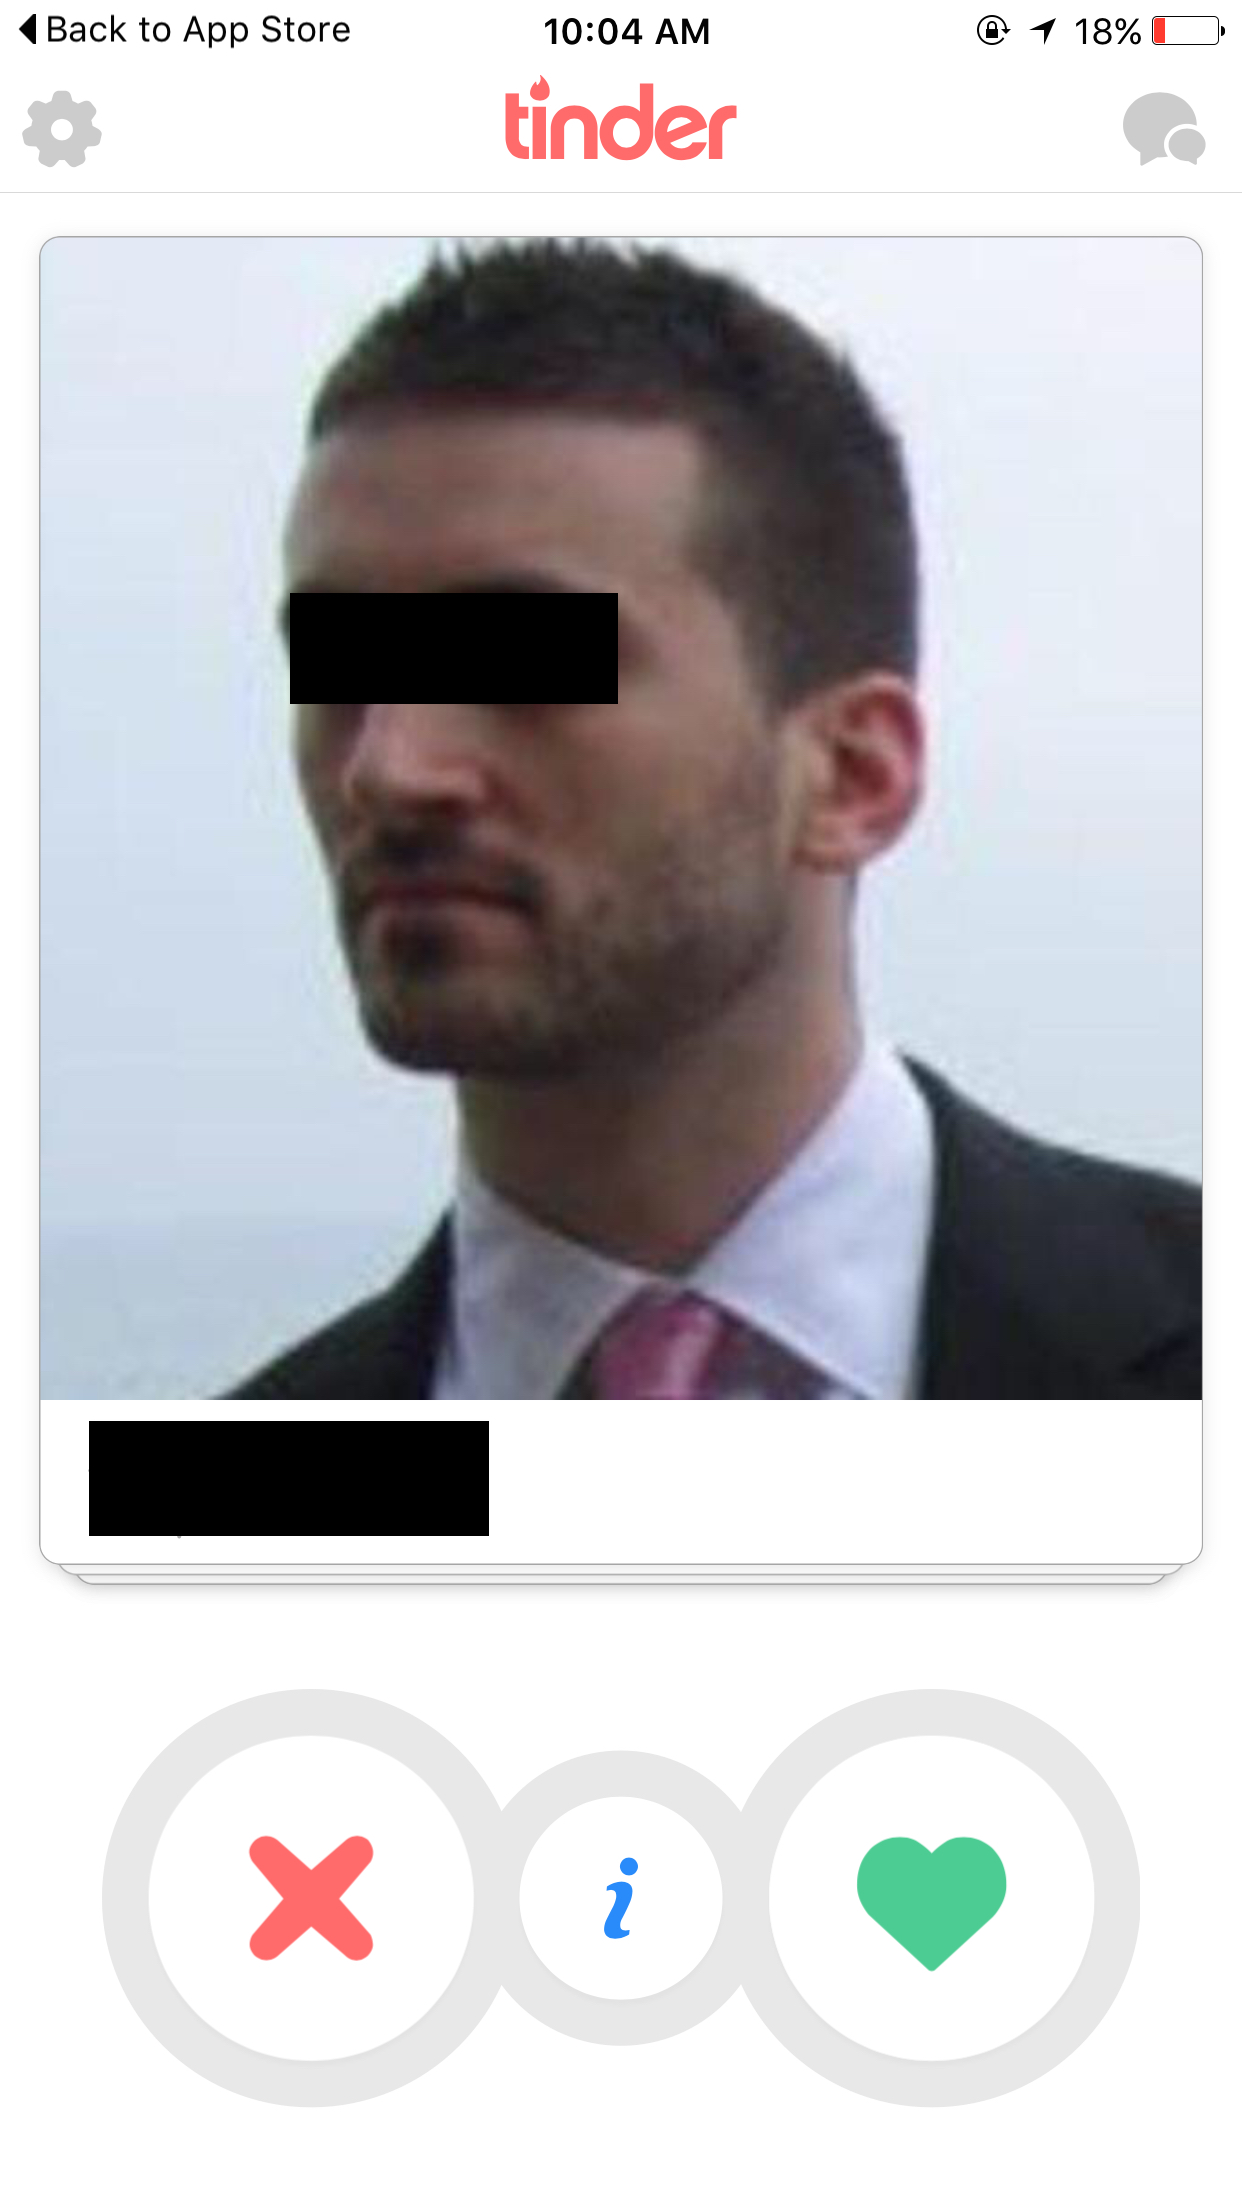 tinder pictures blurry